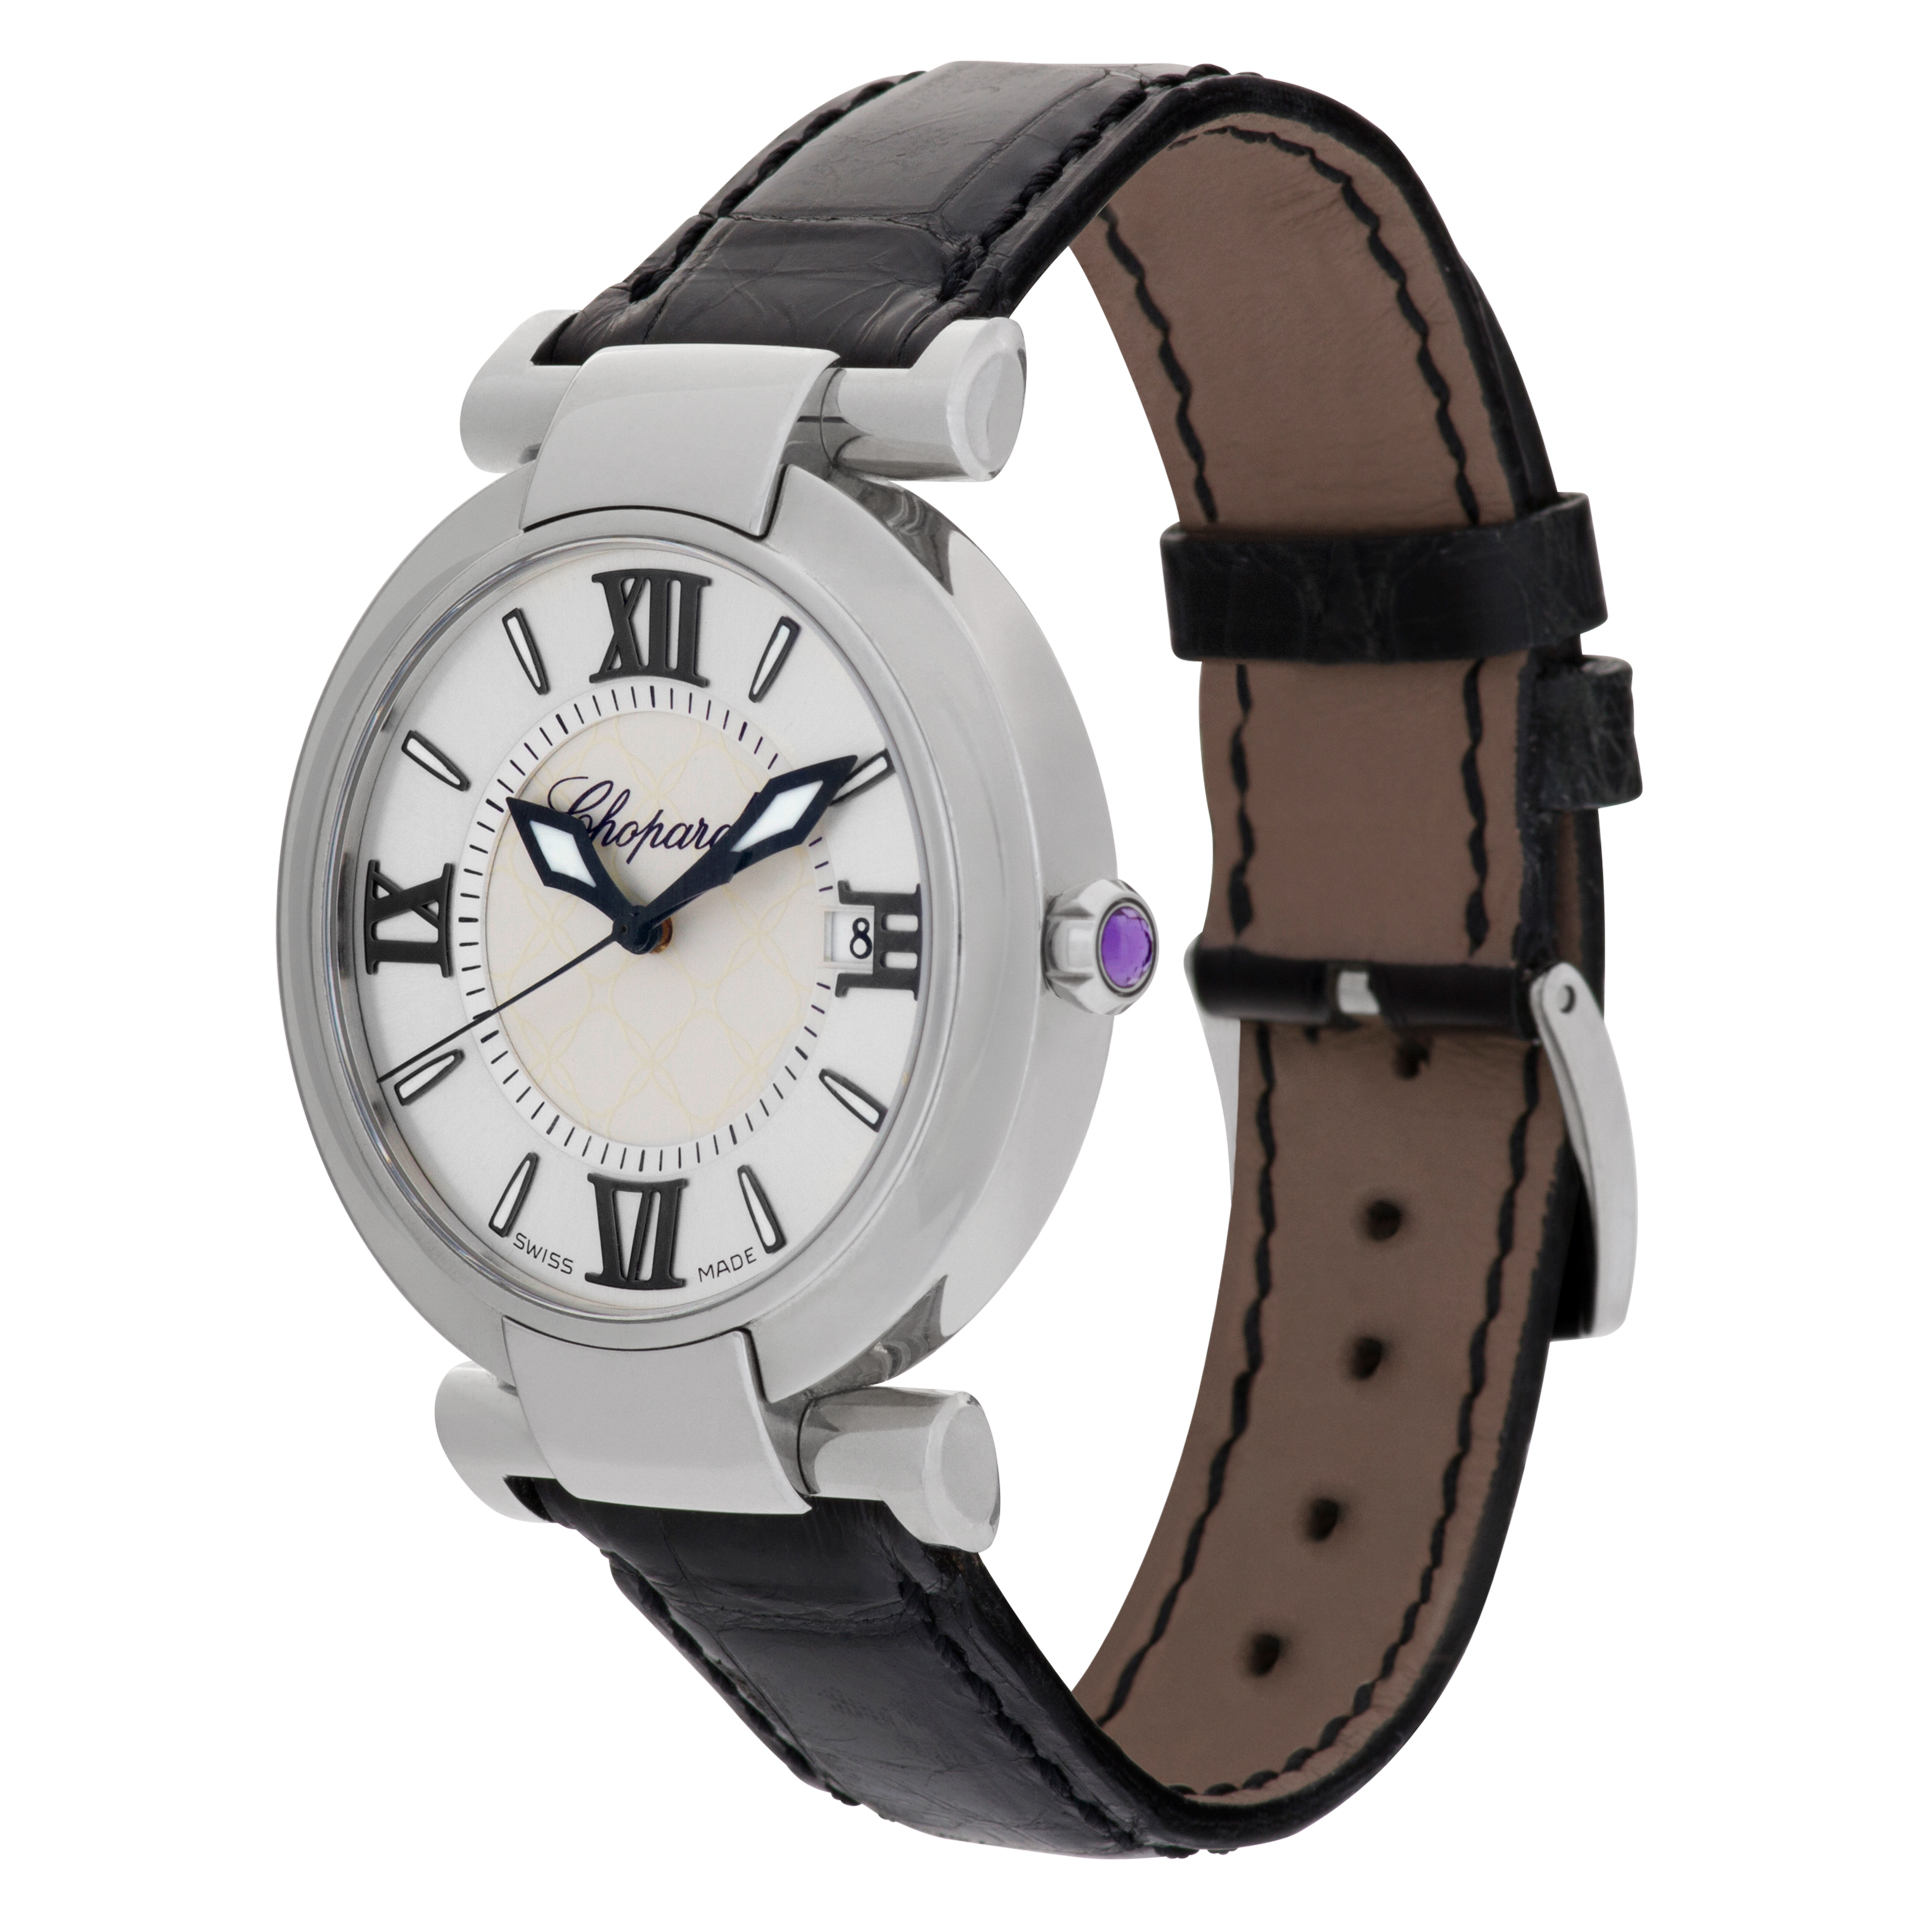 Chopard Imperiale 36mm 8532 image 2